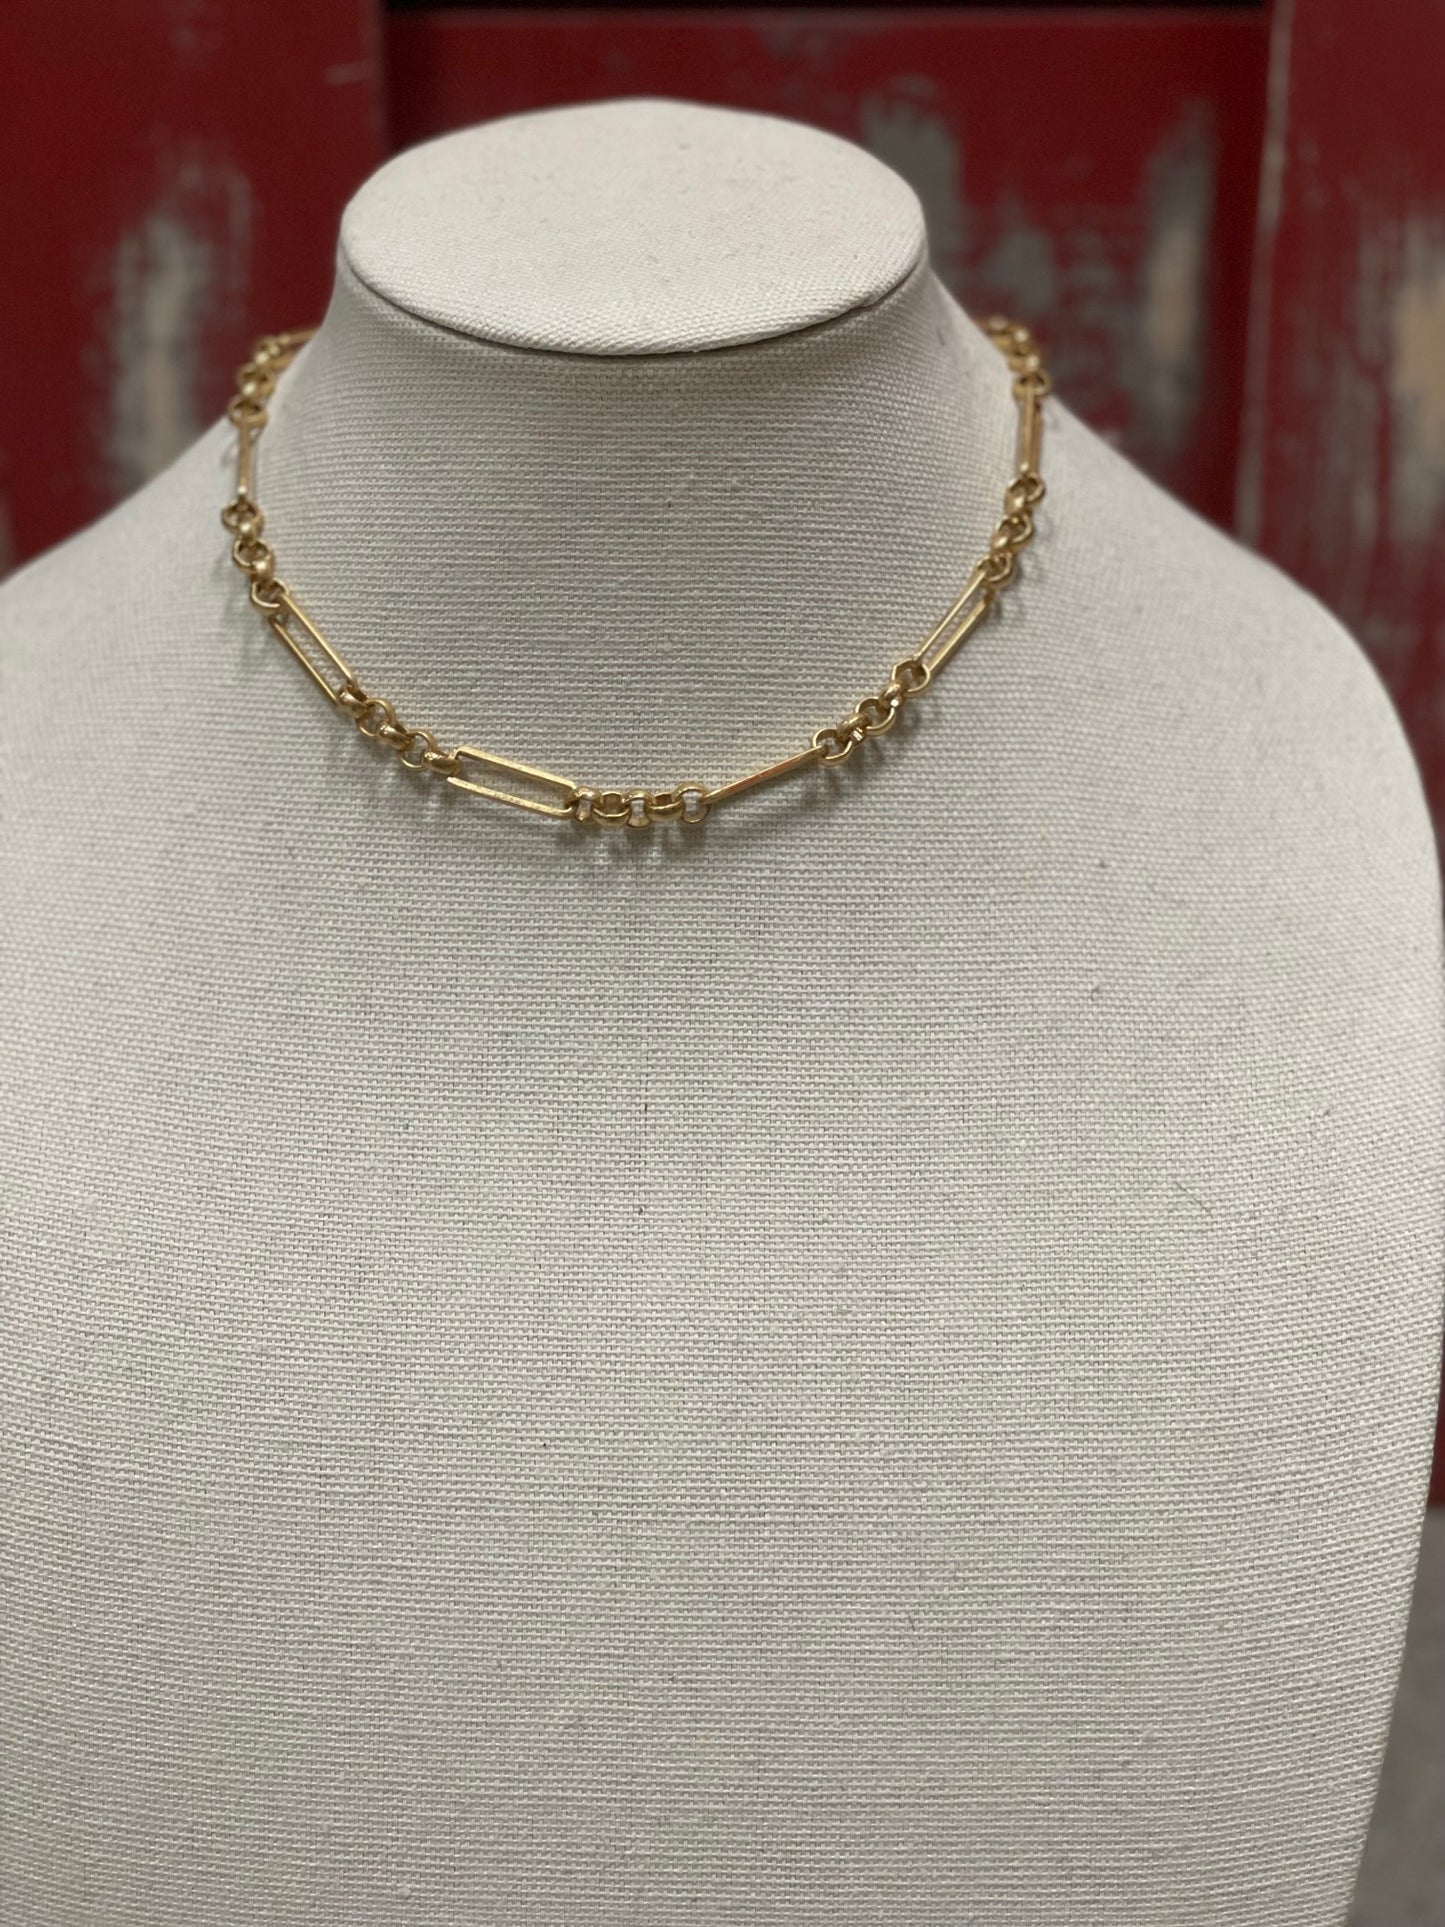 16 Gold Chain Necklace